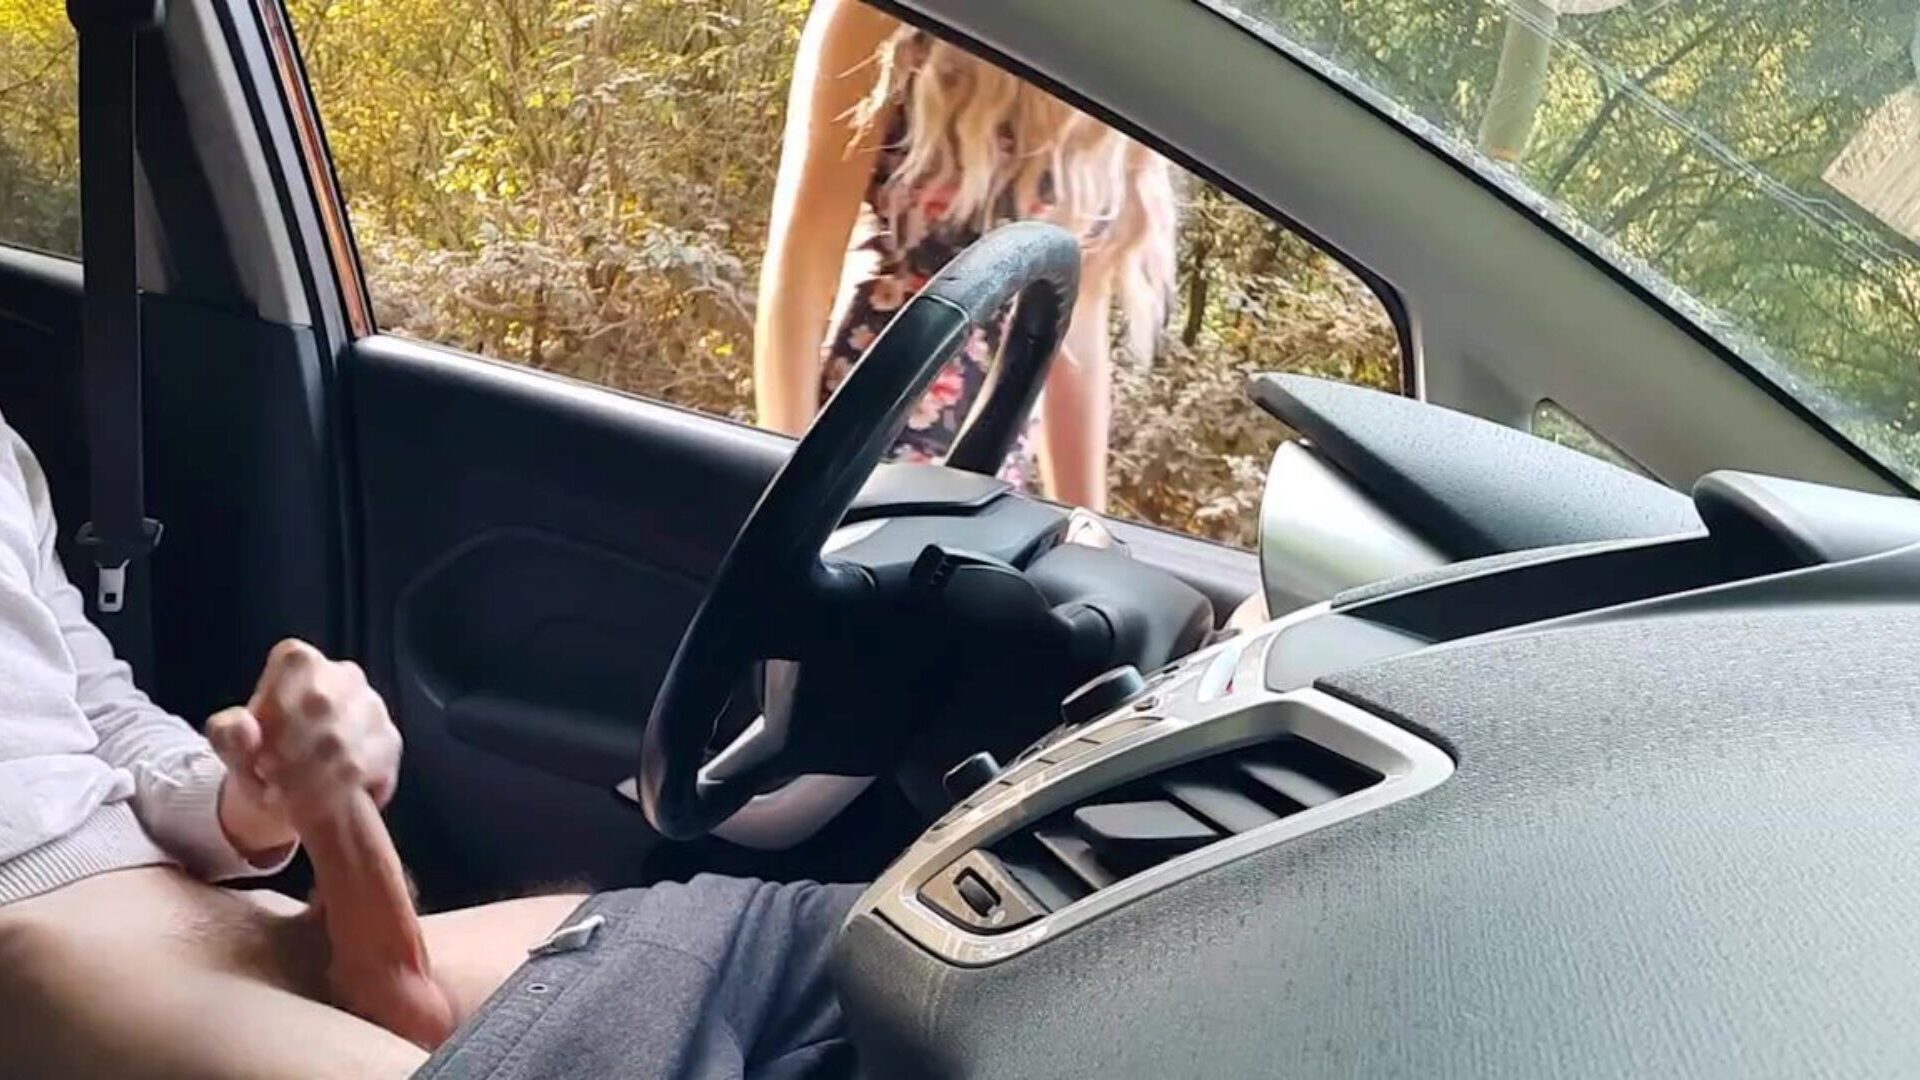 Public Dick Flash! a Naive Teen Caught me Jerking off in the Car in a Public Park and assist me Out.